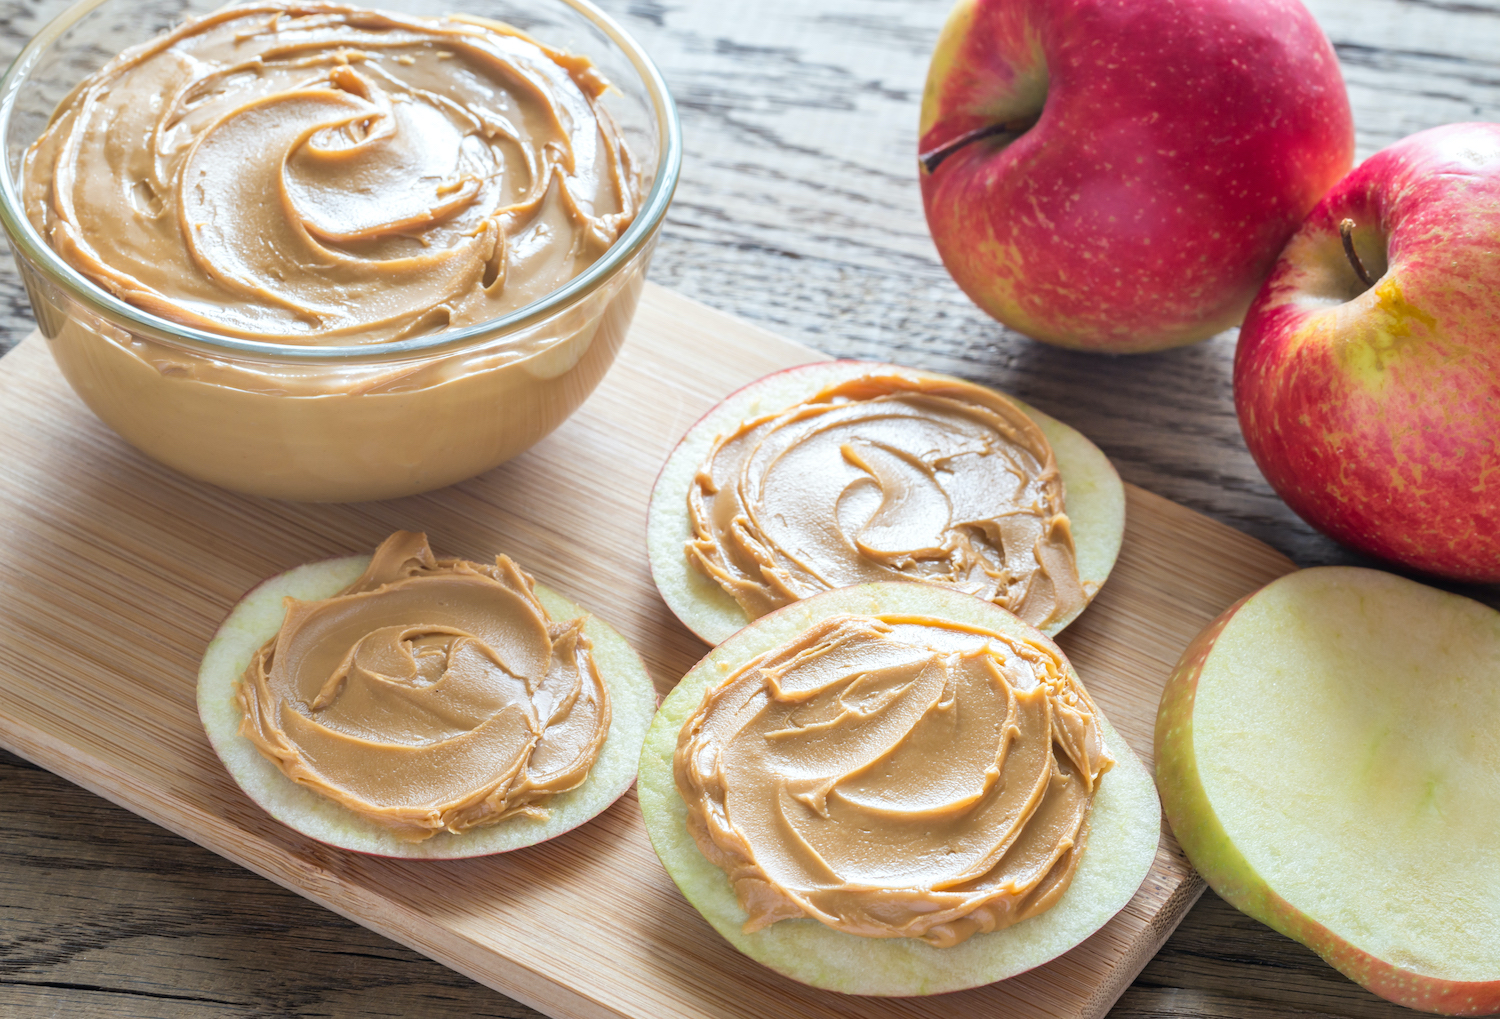 slices-of-apples-with-peanut-butter-PLQ8M59.jpg